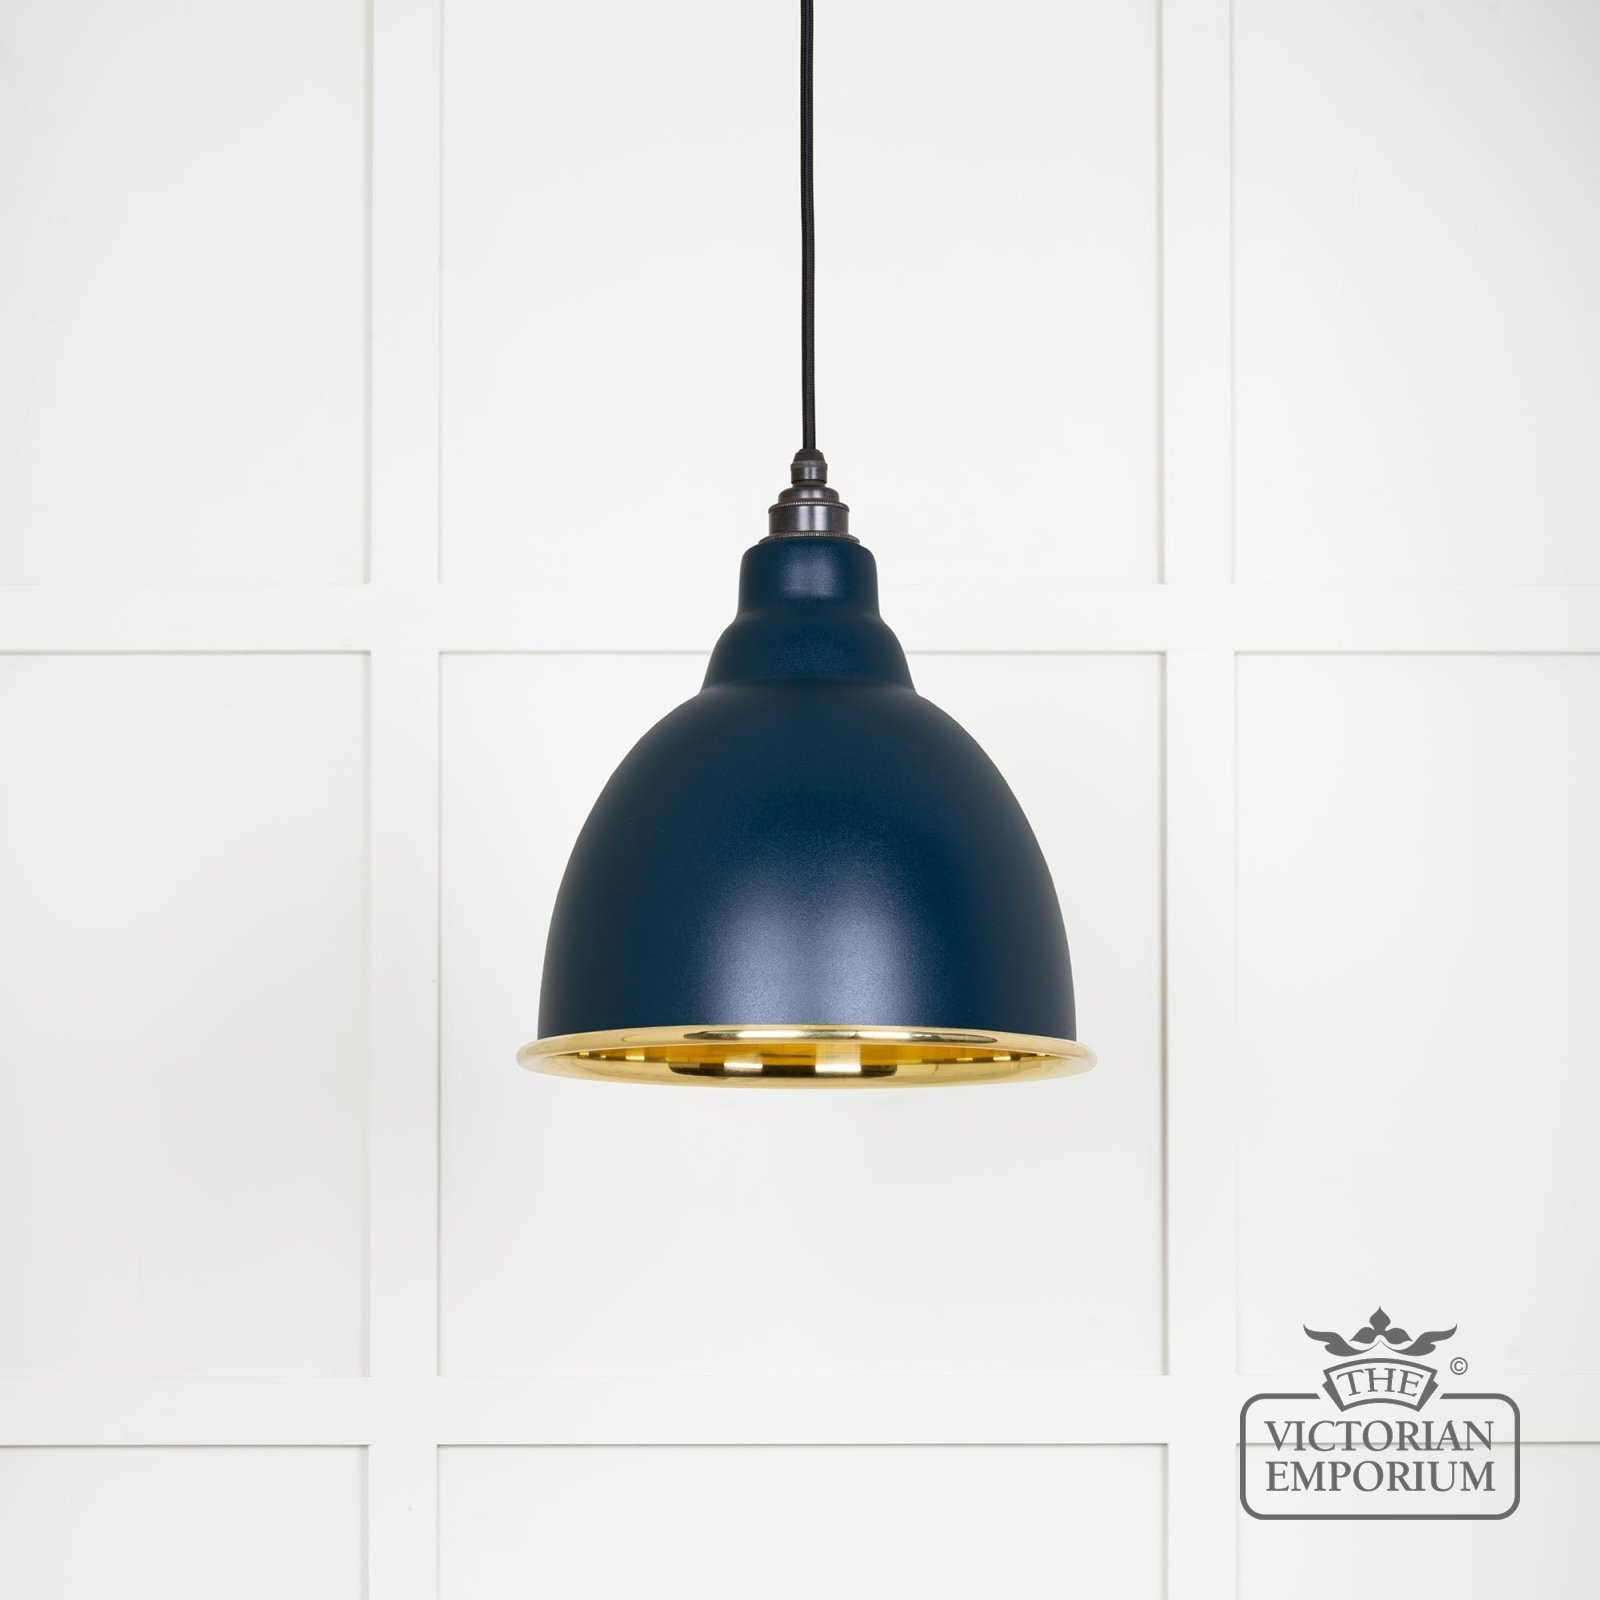 Brindle pendant light in Smooth brass and Dusk finish